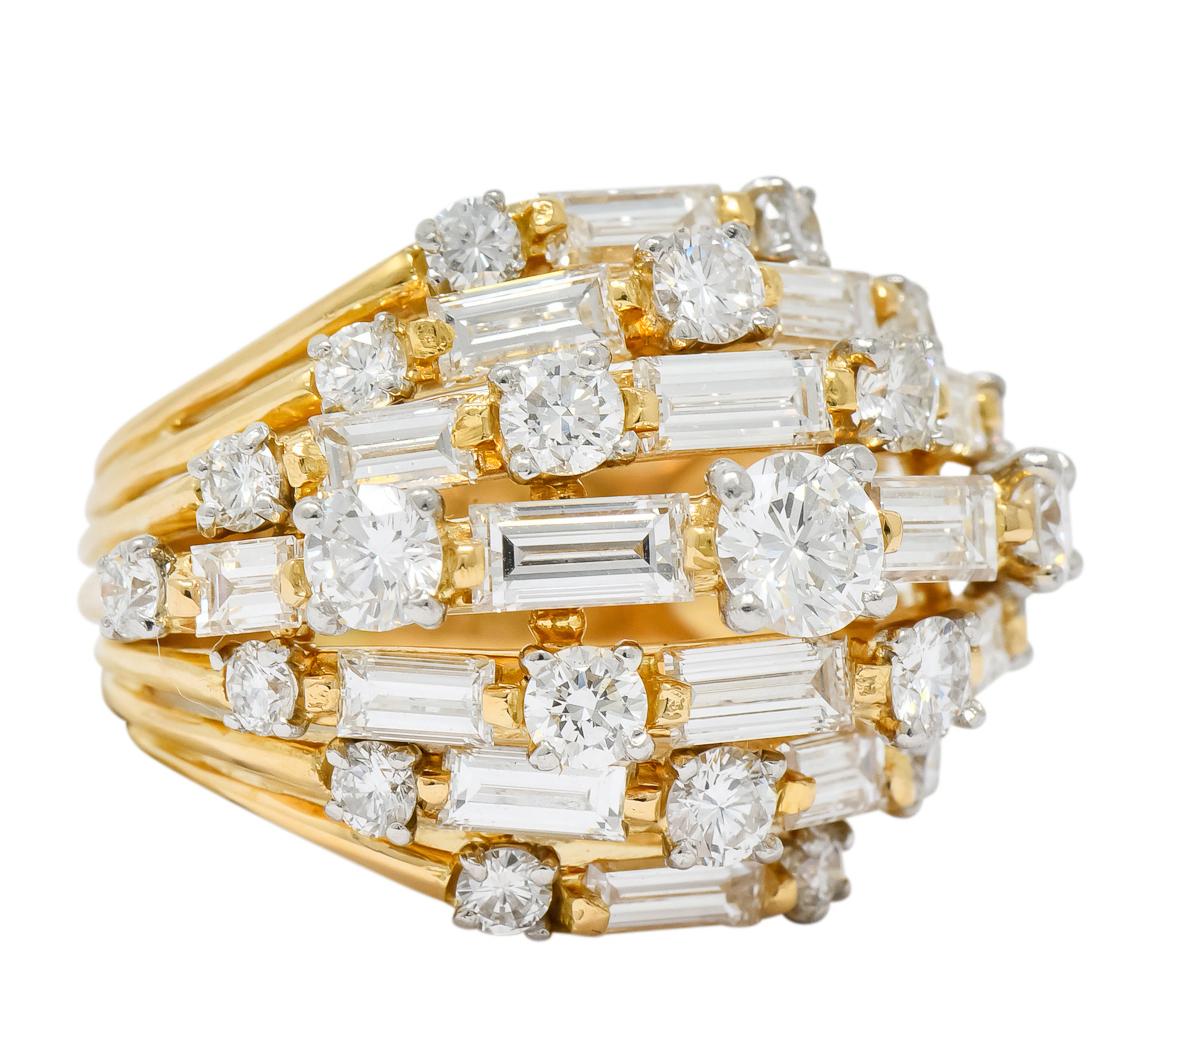 Featuring a dynamic design of seven sections converging as a tapered dome

Set to front with alternating round brilliant and baguette cut, alternating, weighing approximately 4.30 carats total, F to G color and VS clarity

Circa 1960's

Maker's mark